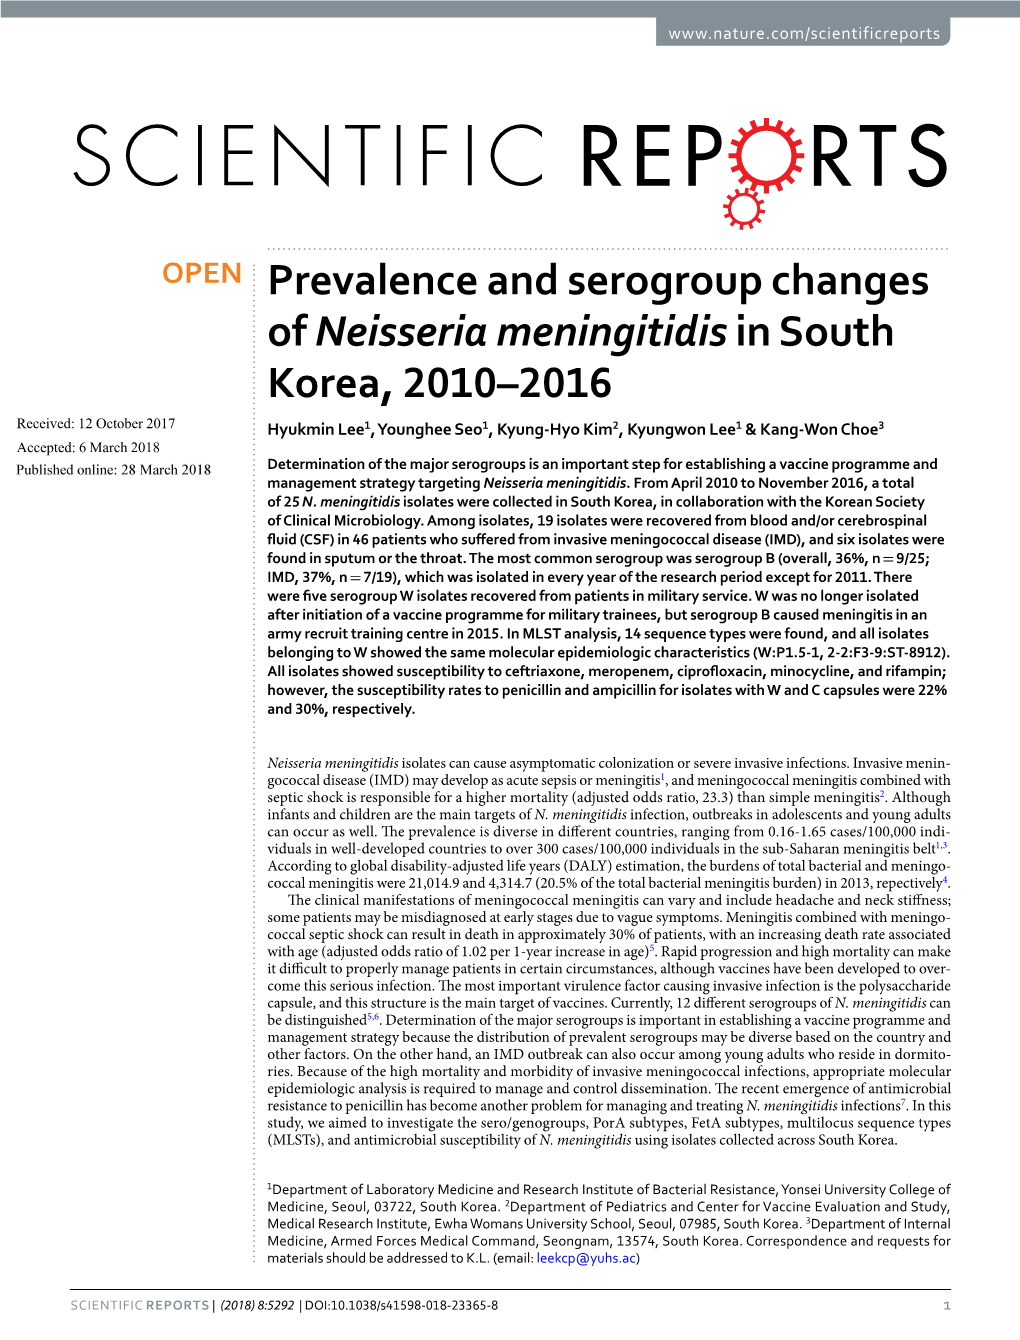 Prevalence and Serogroup Changes of Neisseria